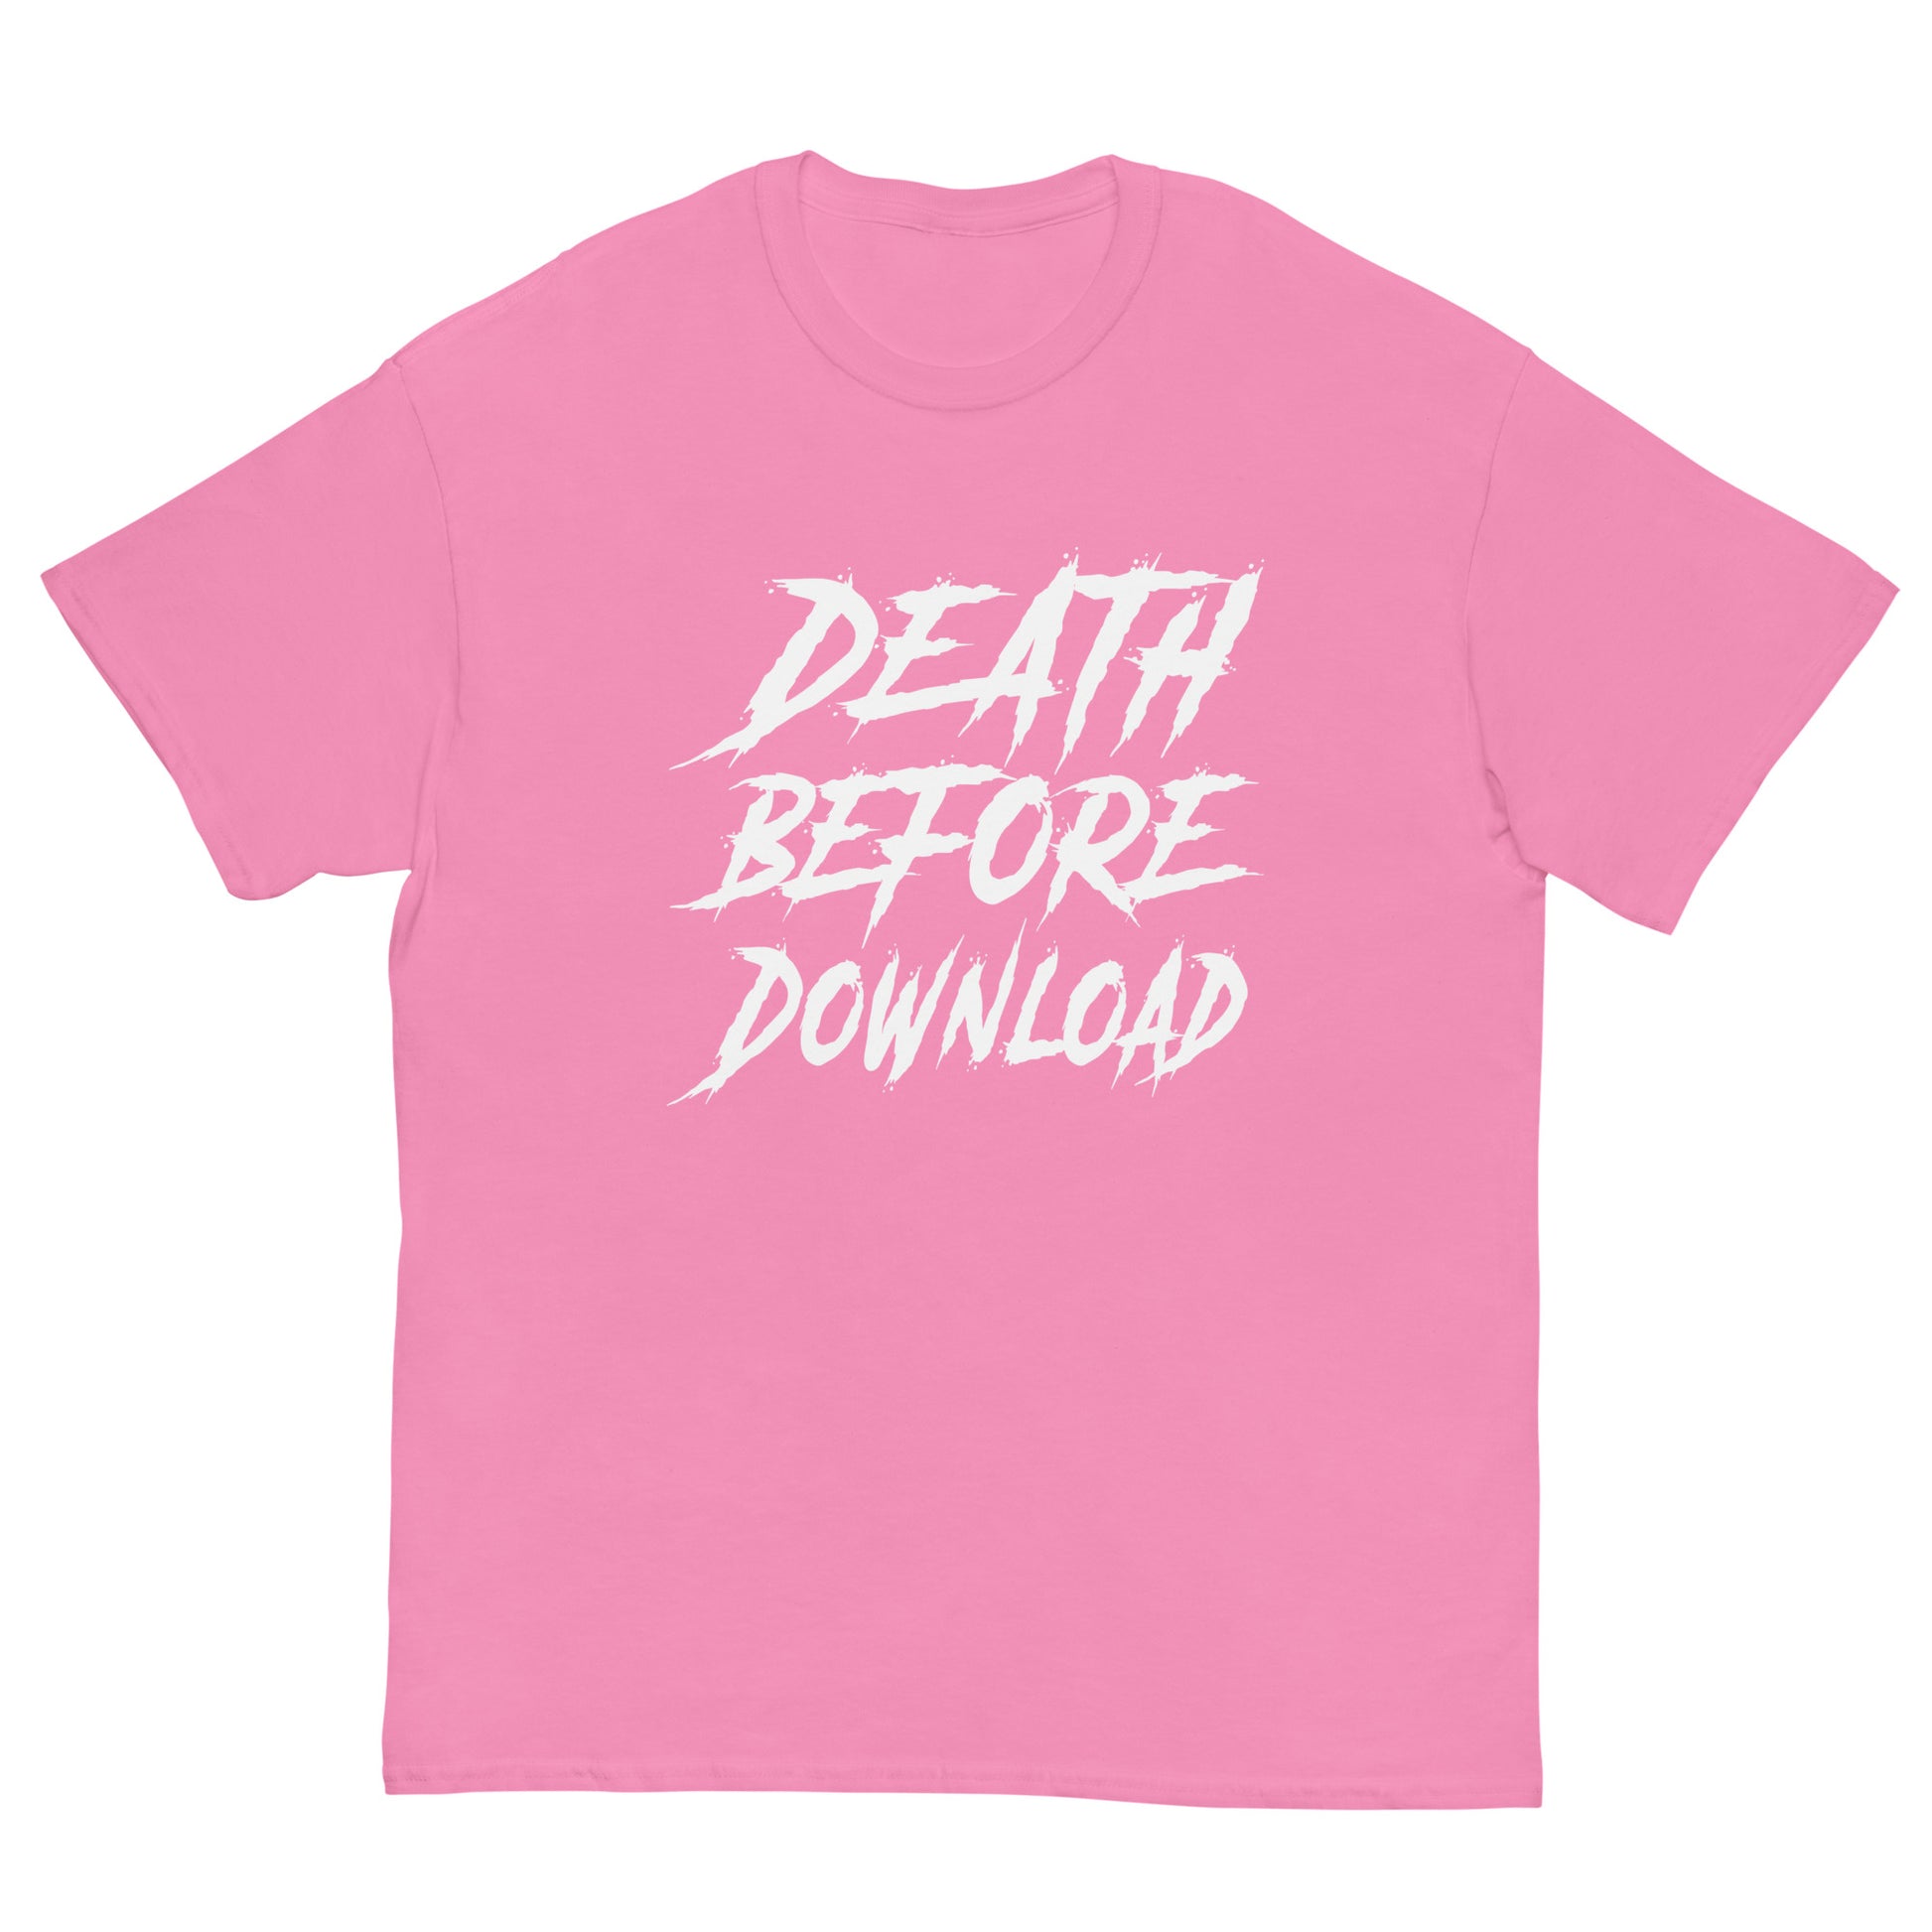 death before download whistler printed t-shirt